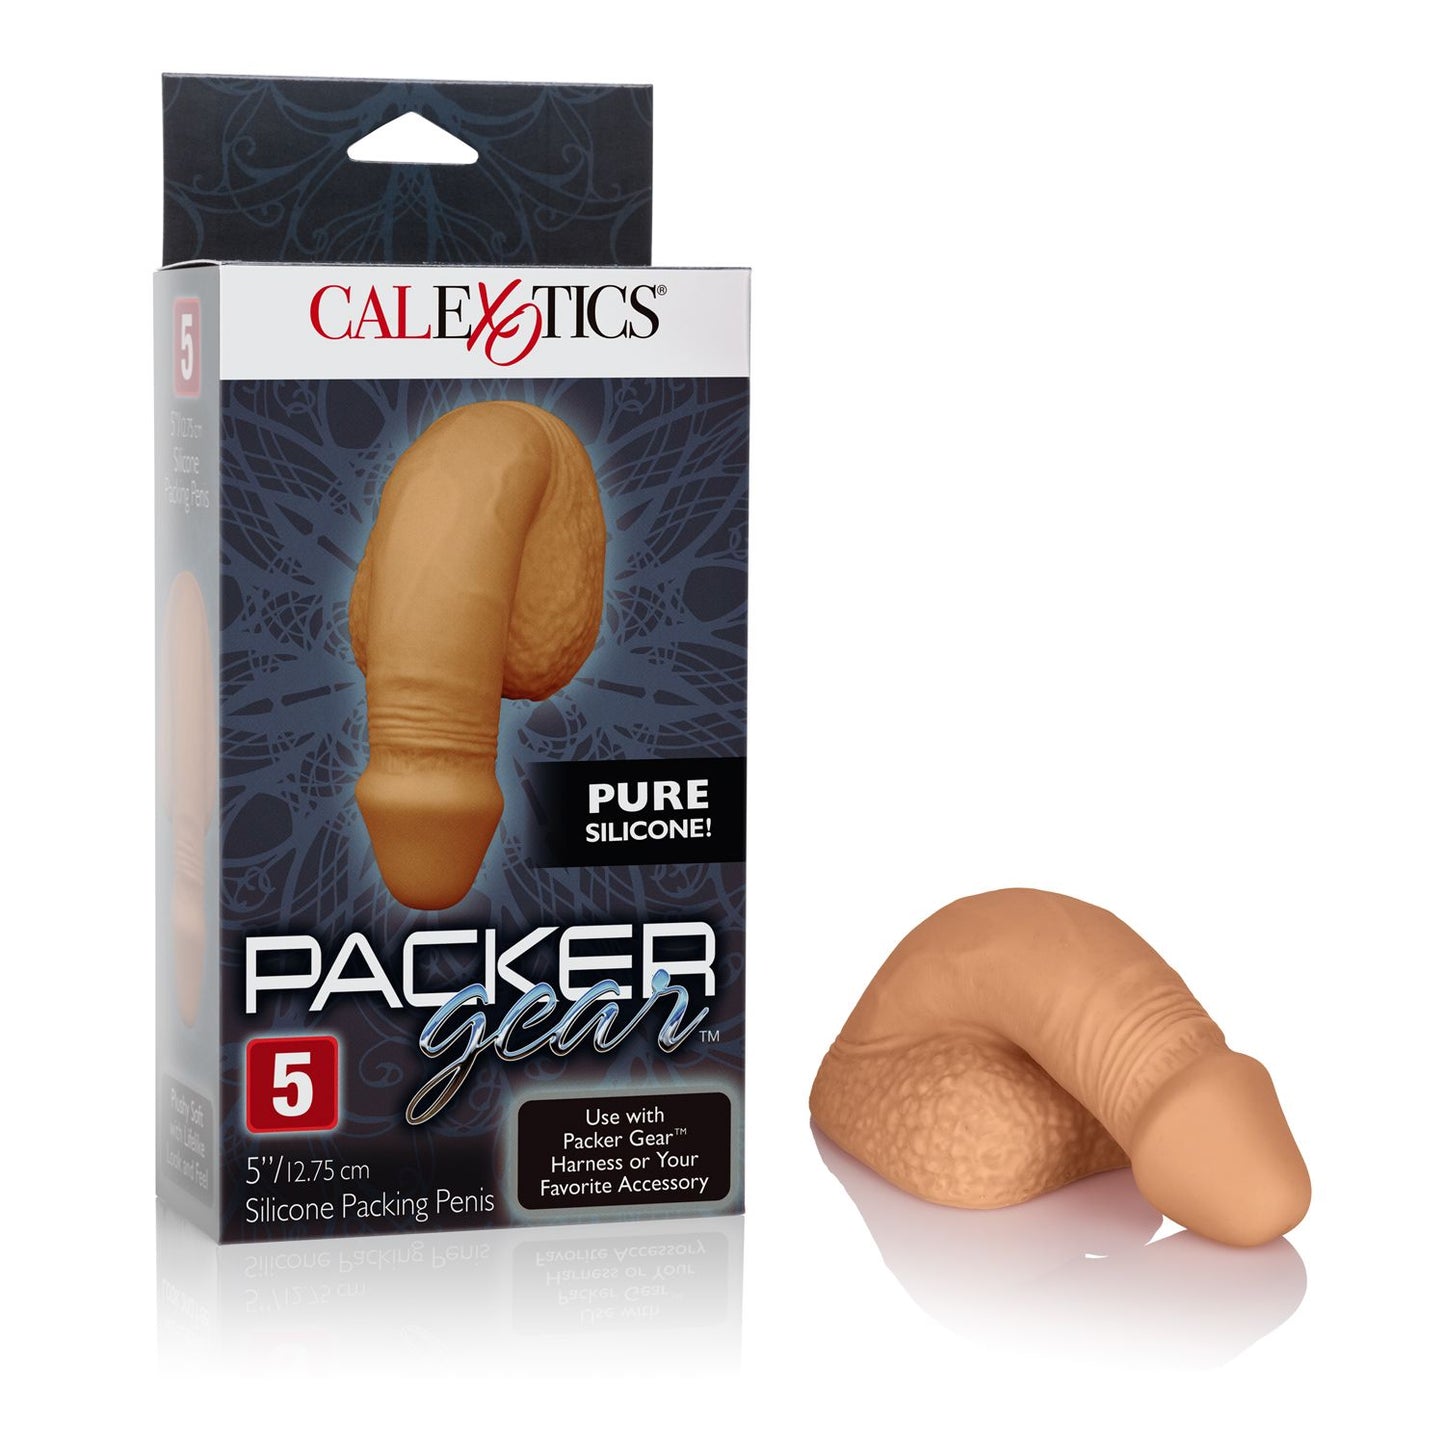 PACKER GEAR - 5 INCH SILICONE PACKING PENIS